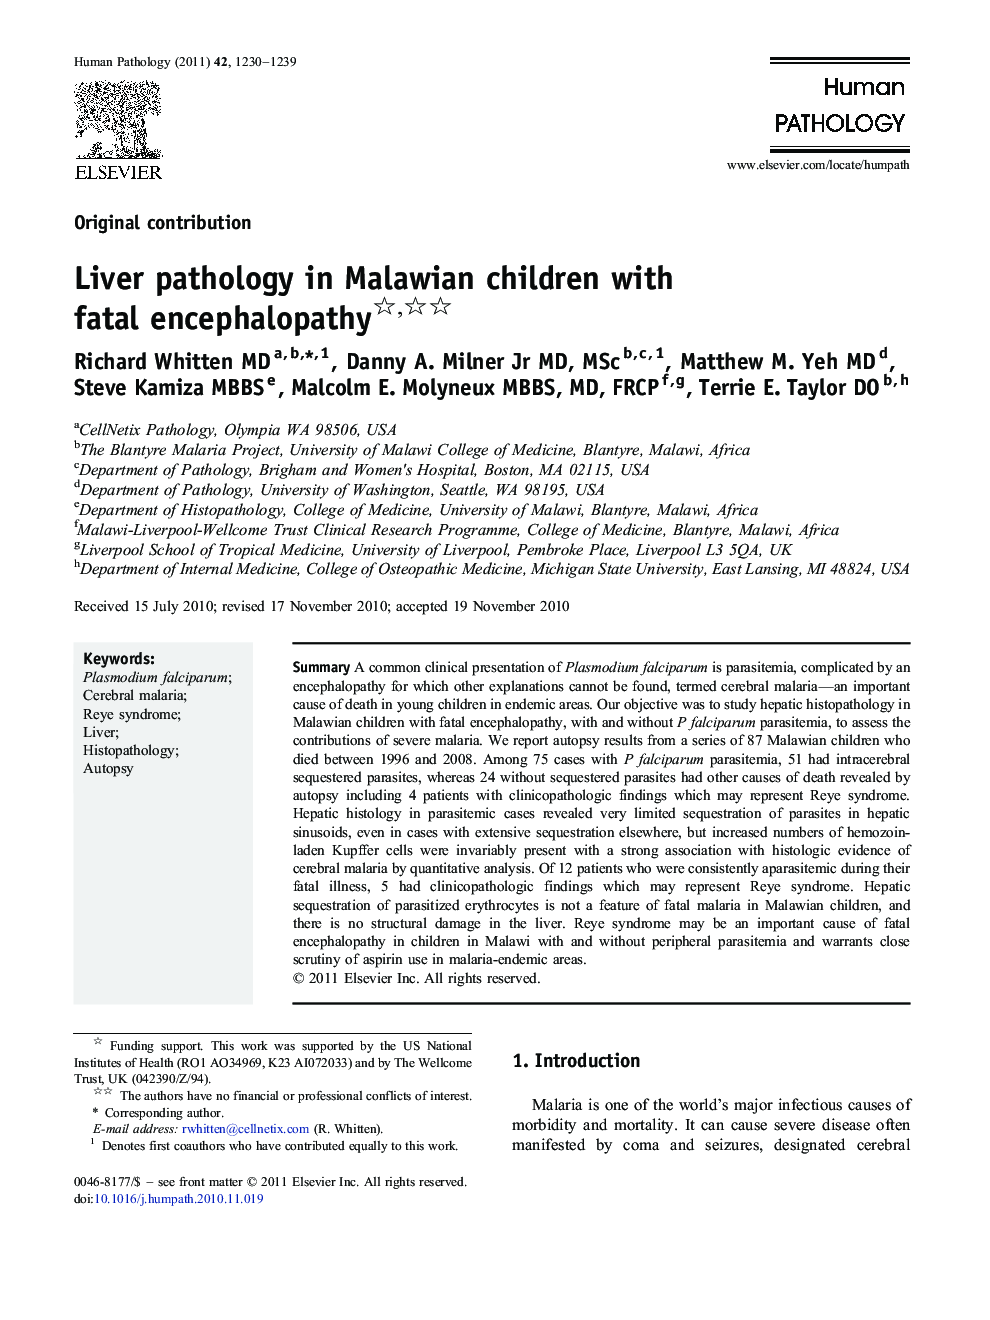 Liver pathology in Malawian children with fatal encephalopathy 